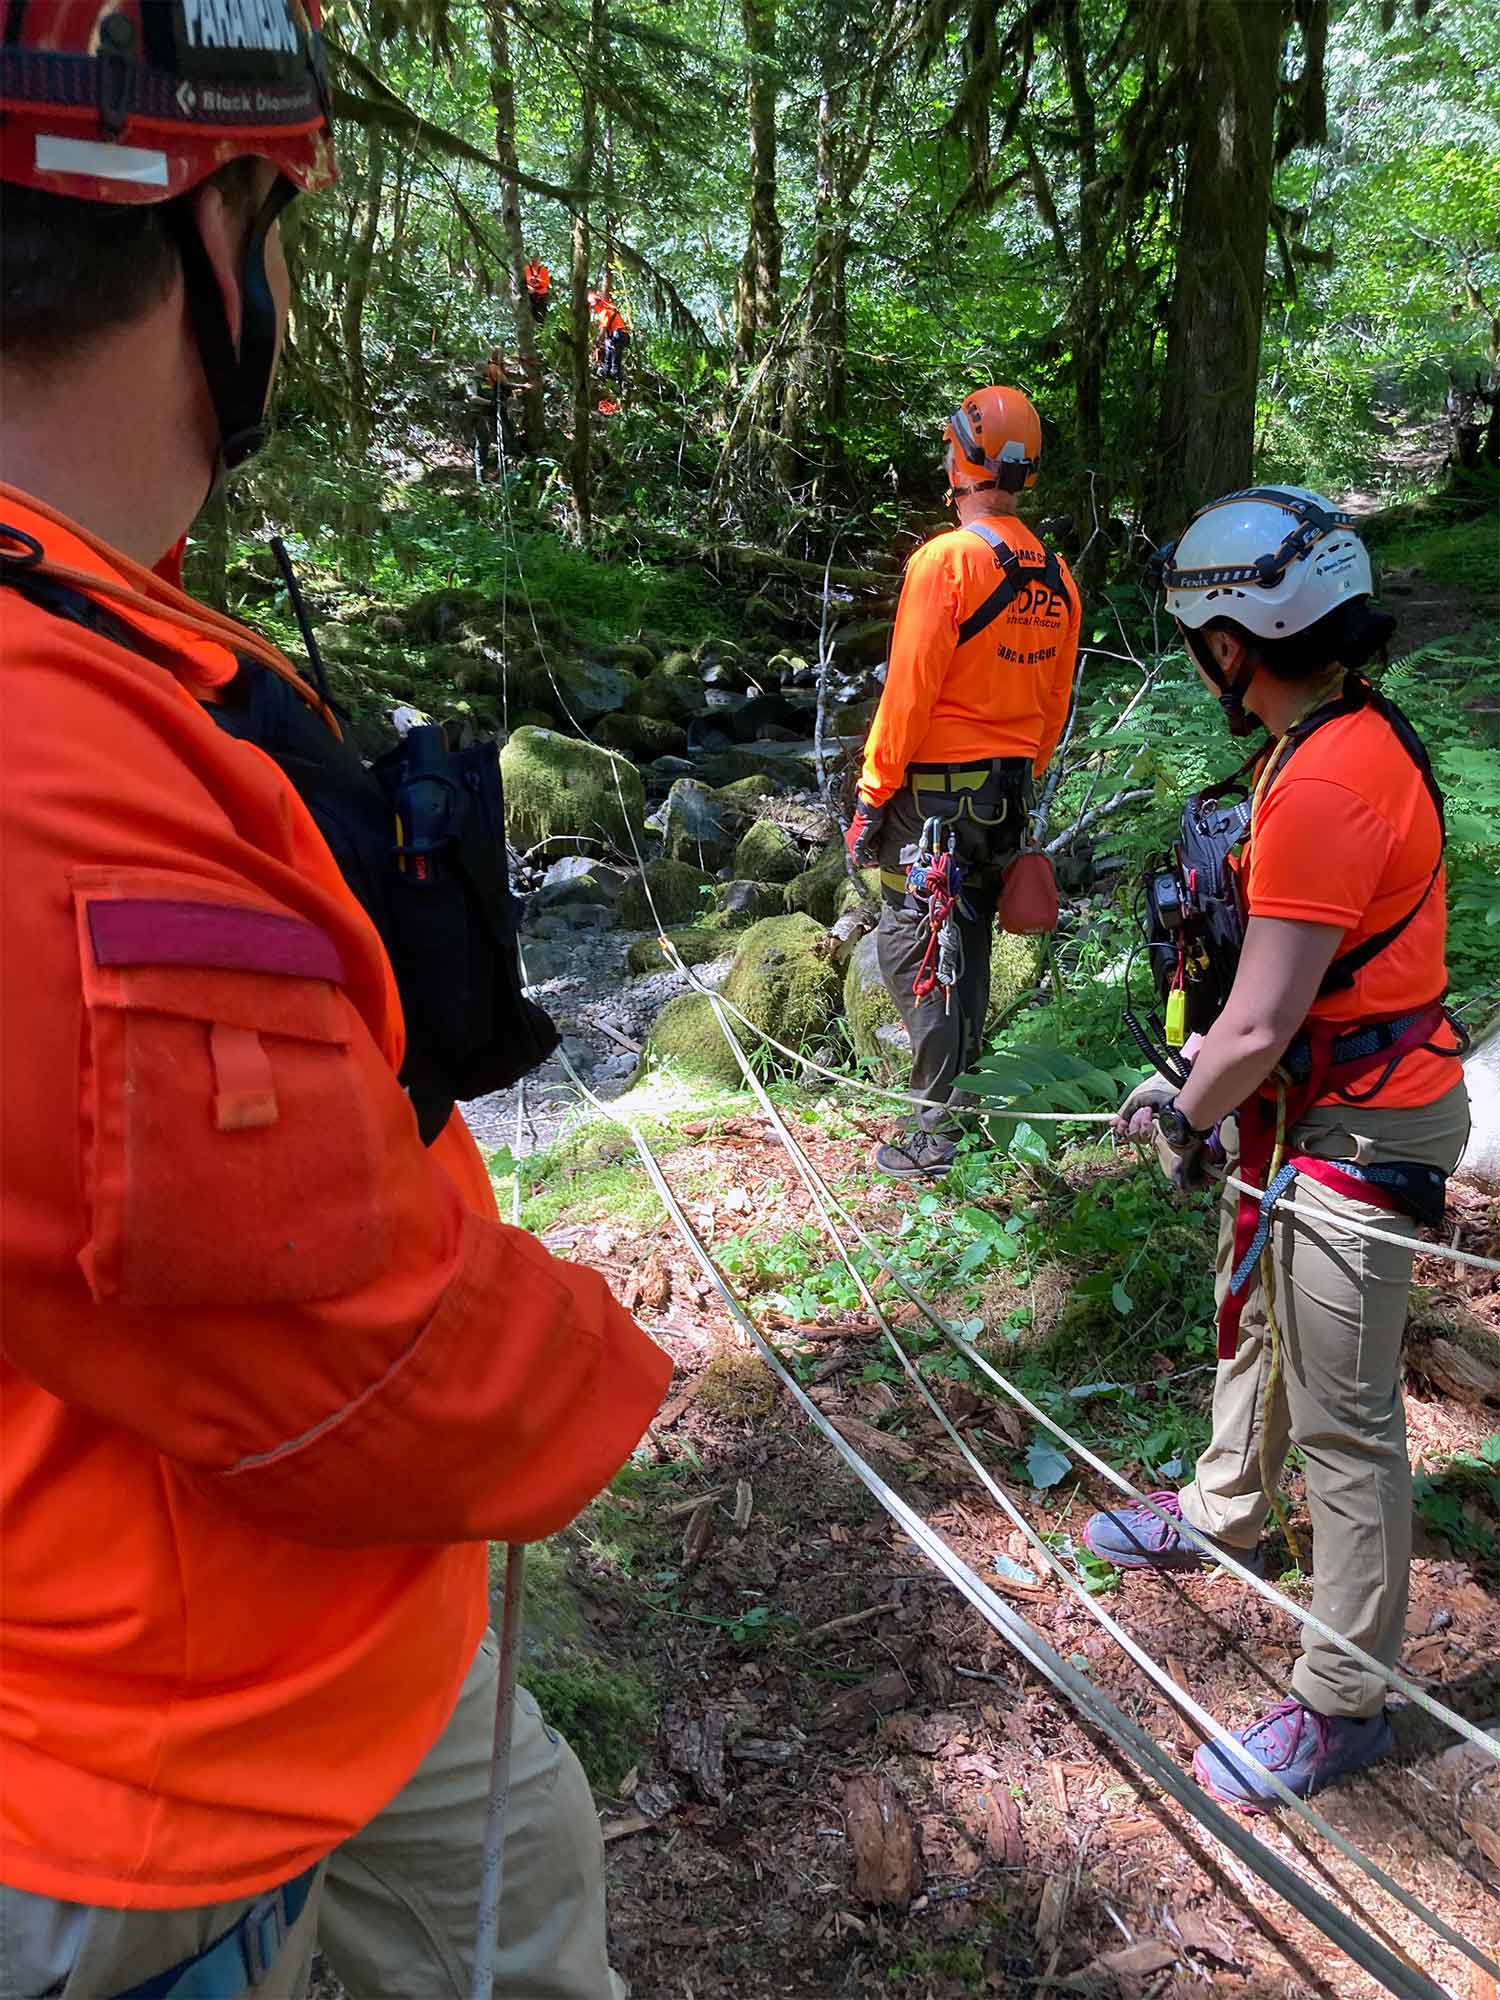 Search and rescue volunteers training in rope rescue, with members wearing orange shirts and helmets holding ropes extending over a creek